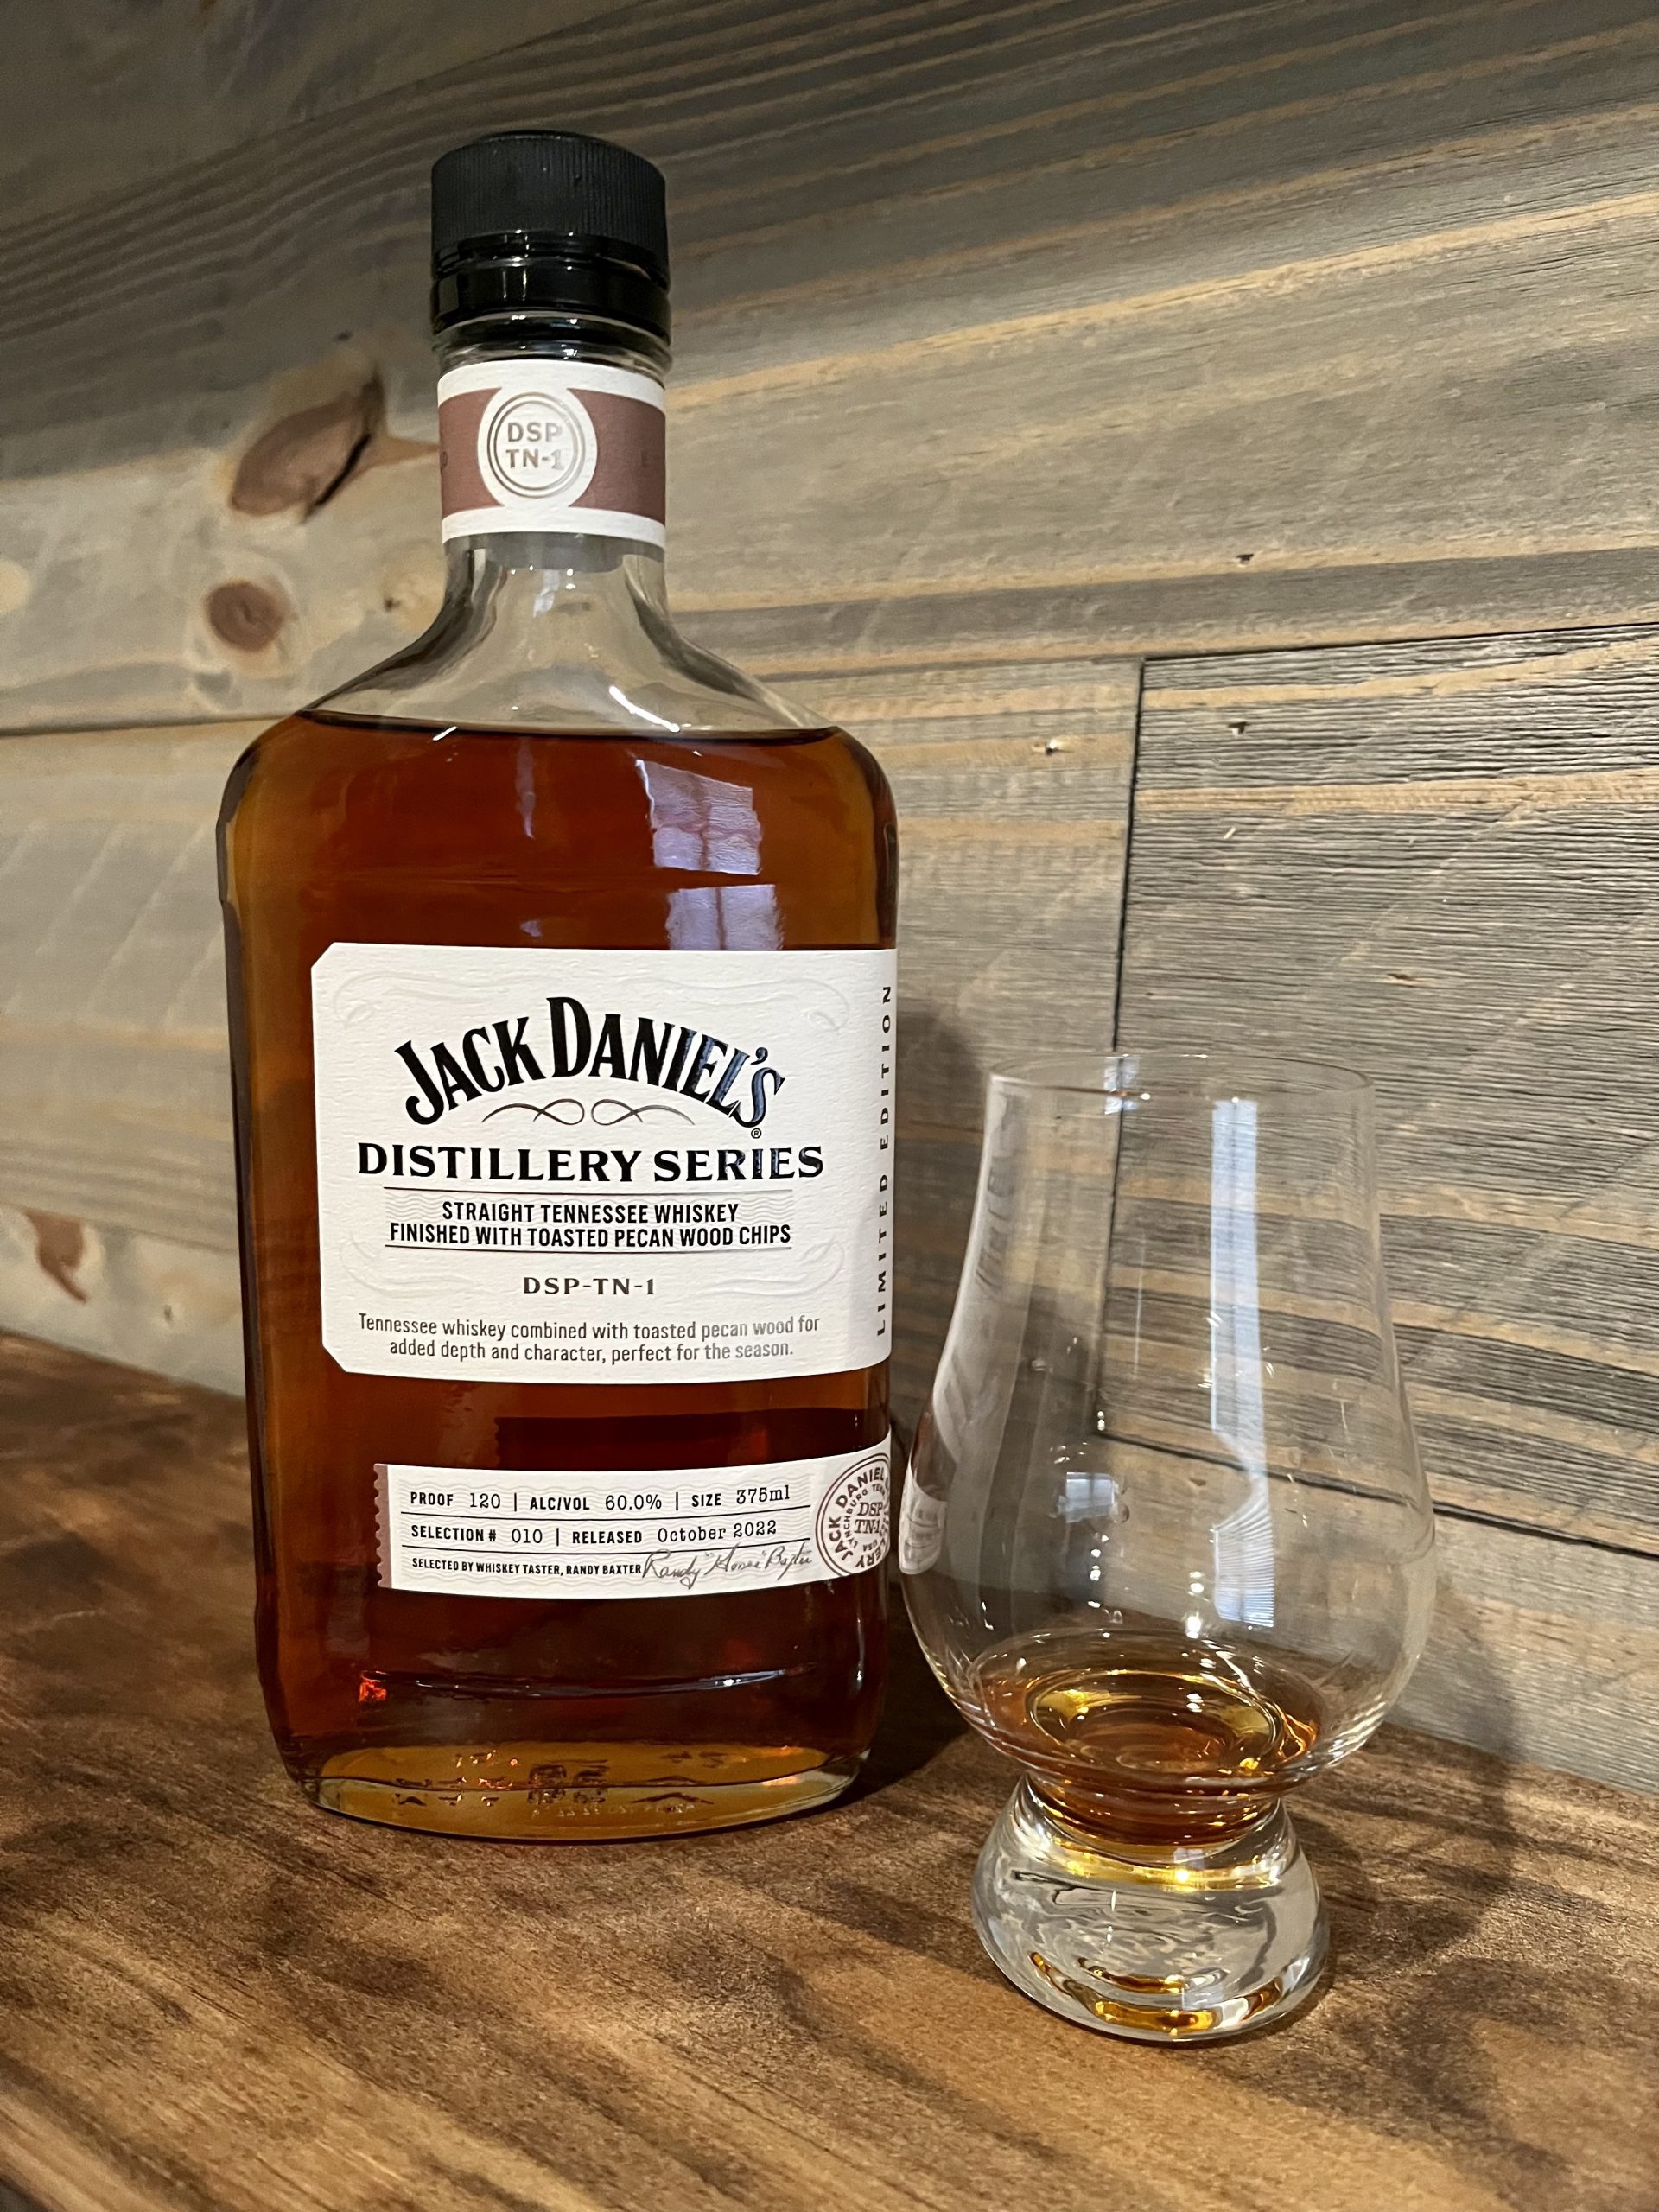 BUY] Jack Daniel's Distillery Series Toasted Pecan Wood Chips Finish  Straight Tennessee Whiskey